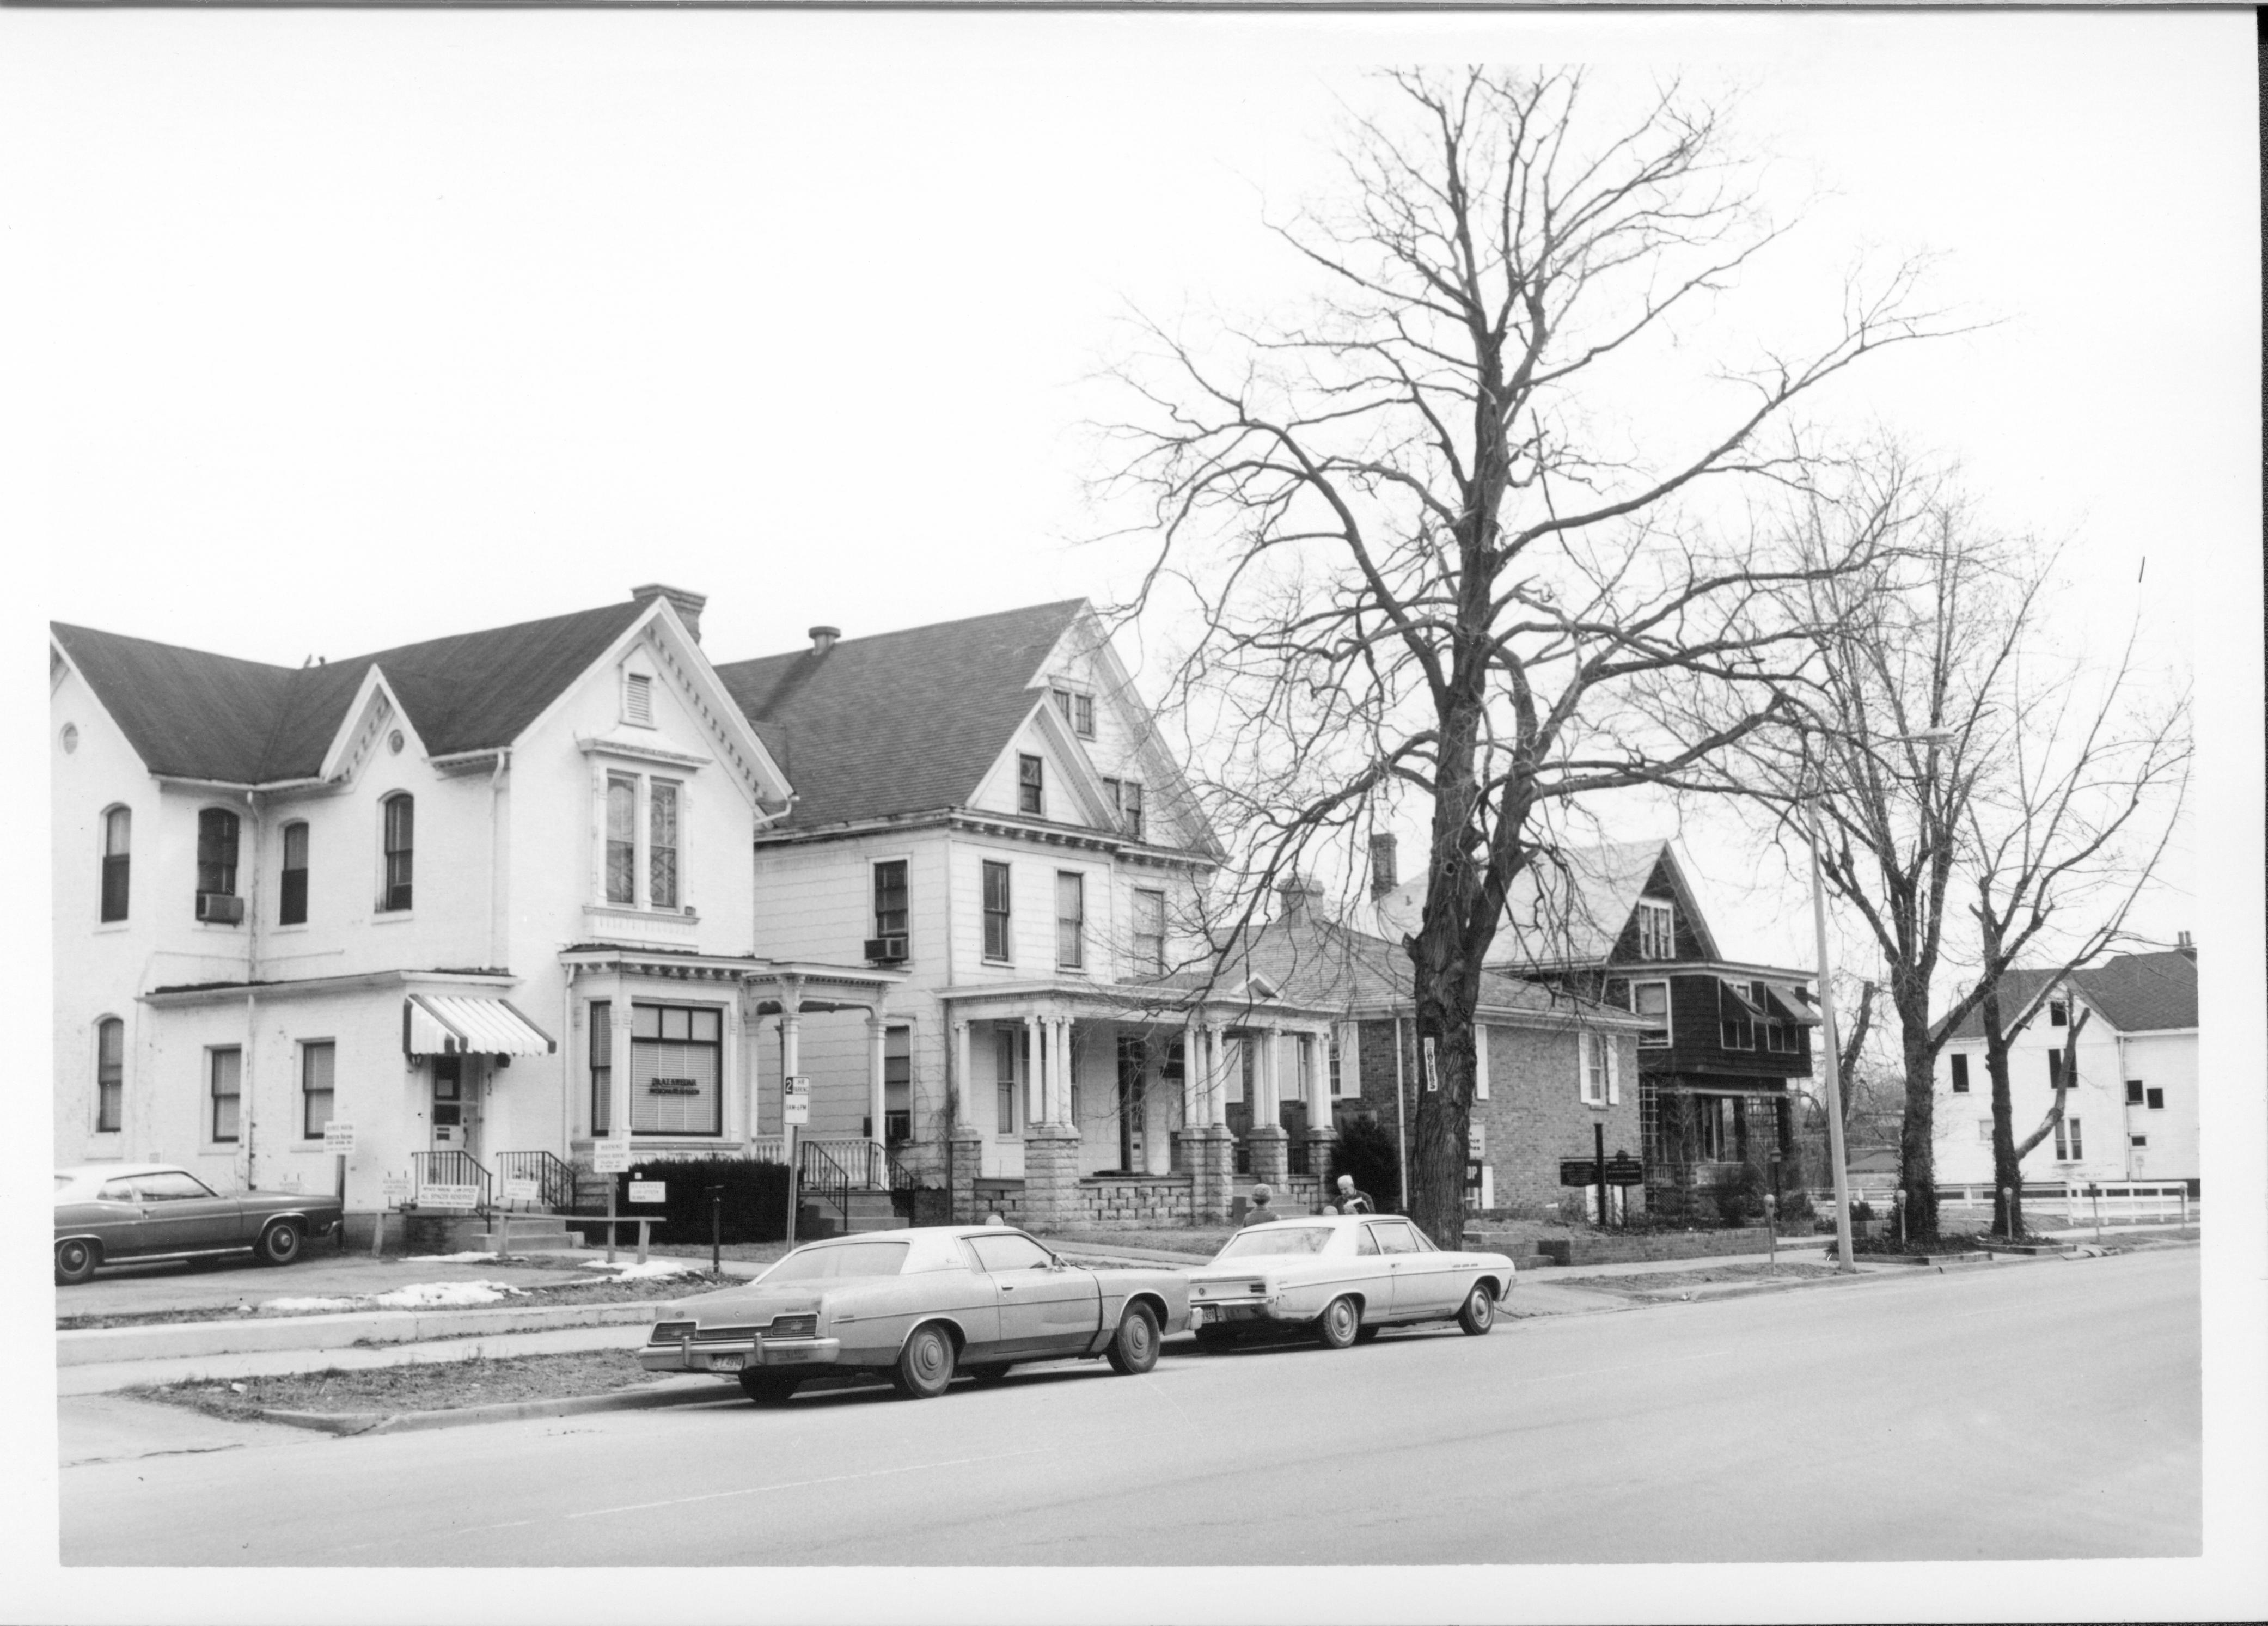 Home and office of Dr. Albert T. Kwedar (far left) on Block 7, Lot 4, on 7th Street, now location of Visitor Center Looking Southeast on 7th Street, south of Capitol. Visitor Center, parking lot, 7th Street, Kwedar